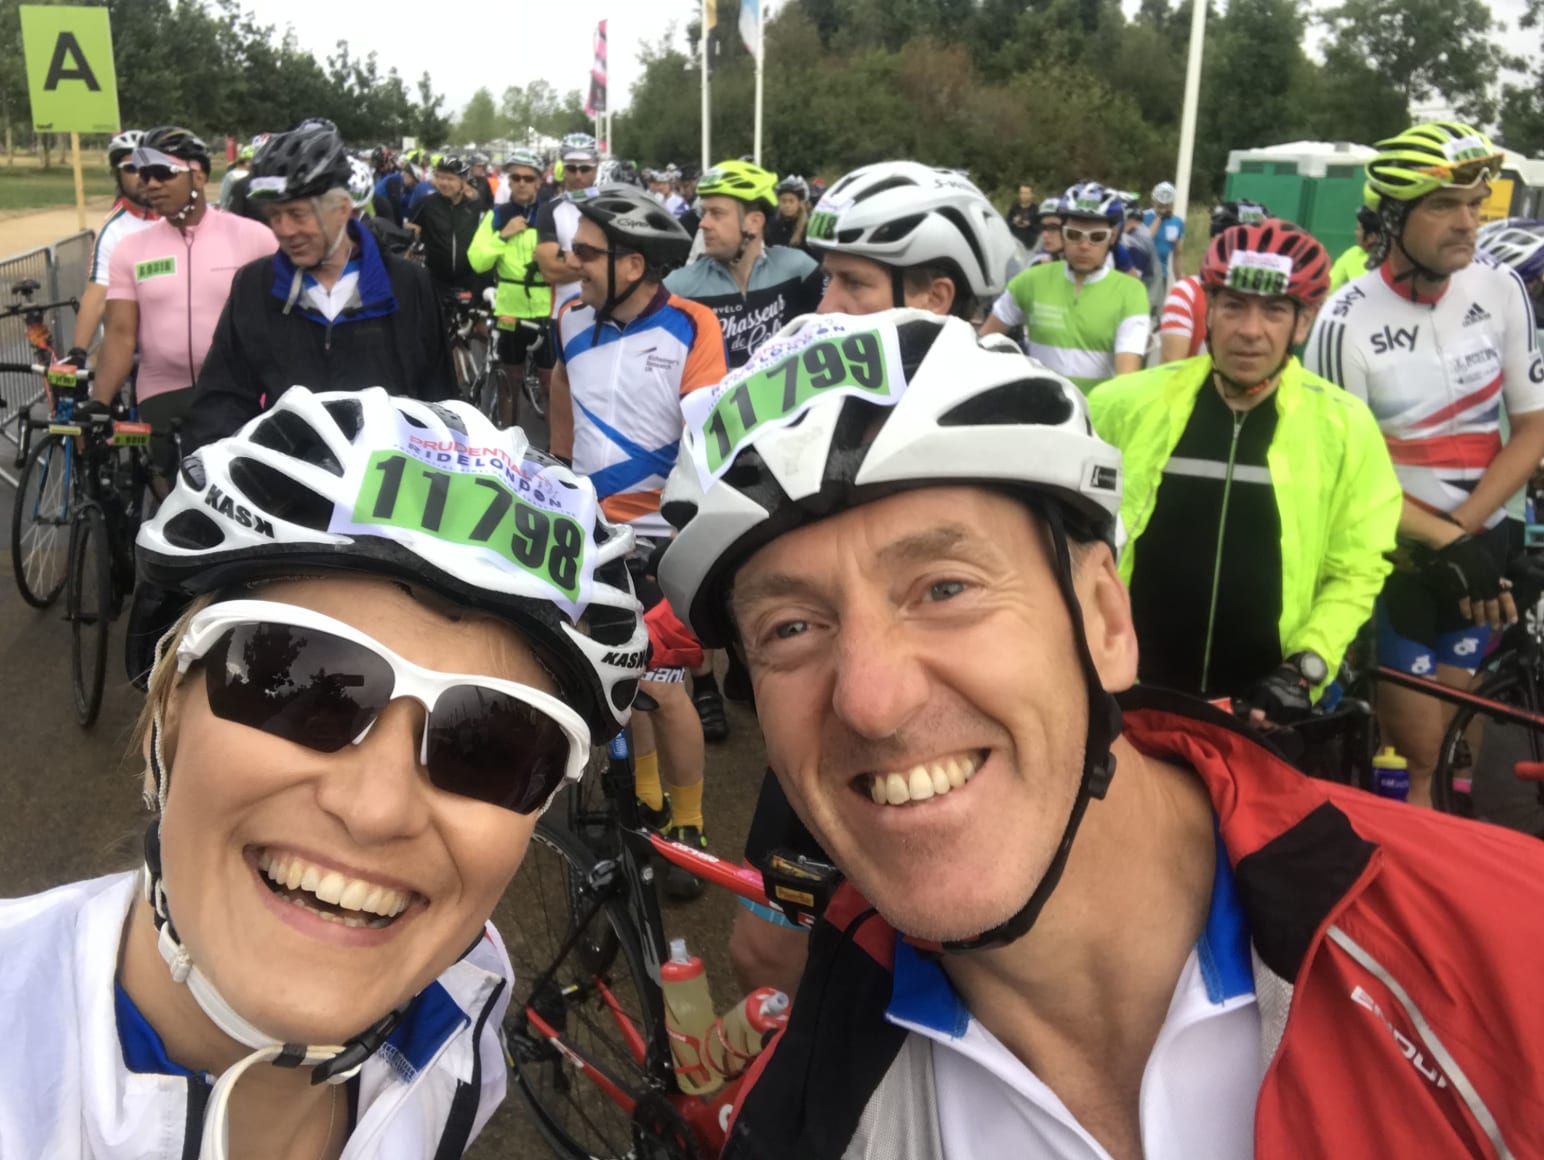 Claire Kremer and Paul Parrish at the start of Ride100